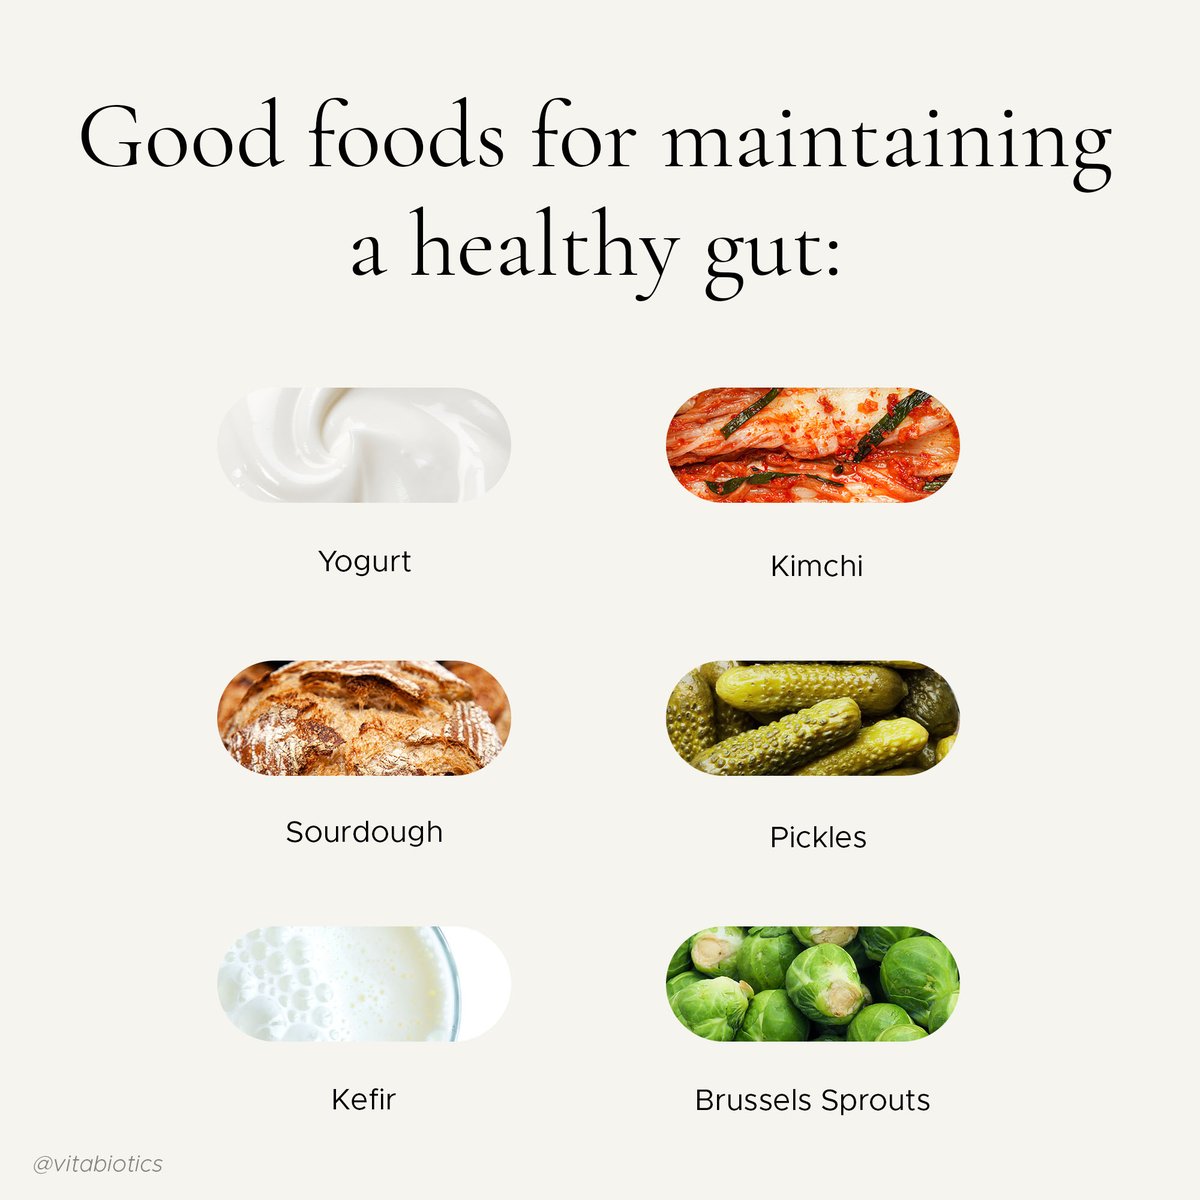 Maintaining a healthy gut is key to overall wellbeing, and these incredible foods are here to lend a helping hand!⁣
⁣
Let's raise a fork (or spoon!) to these amazing foods that promote good digestion and support our overall health.

#HealthyEating #HealthyLiving #Nutrition